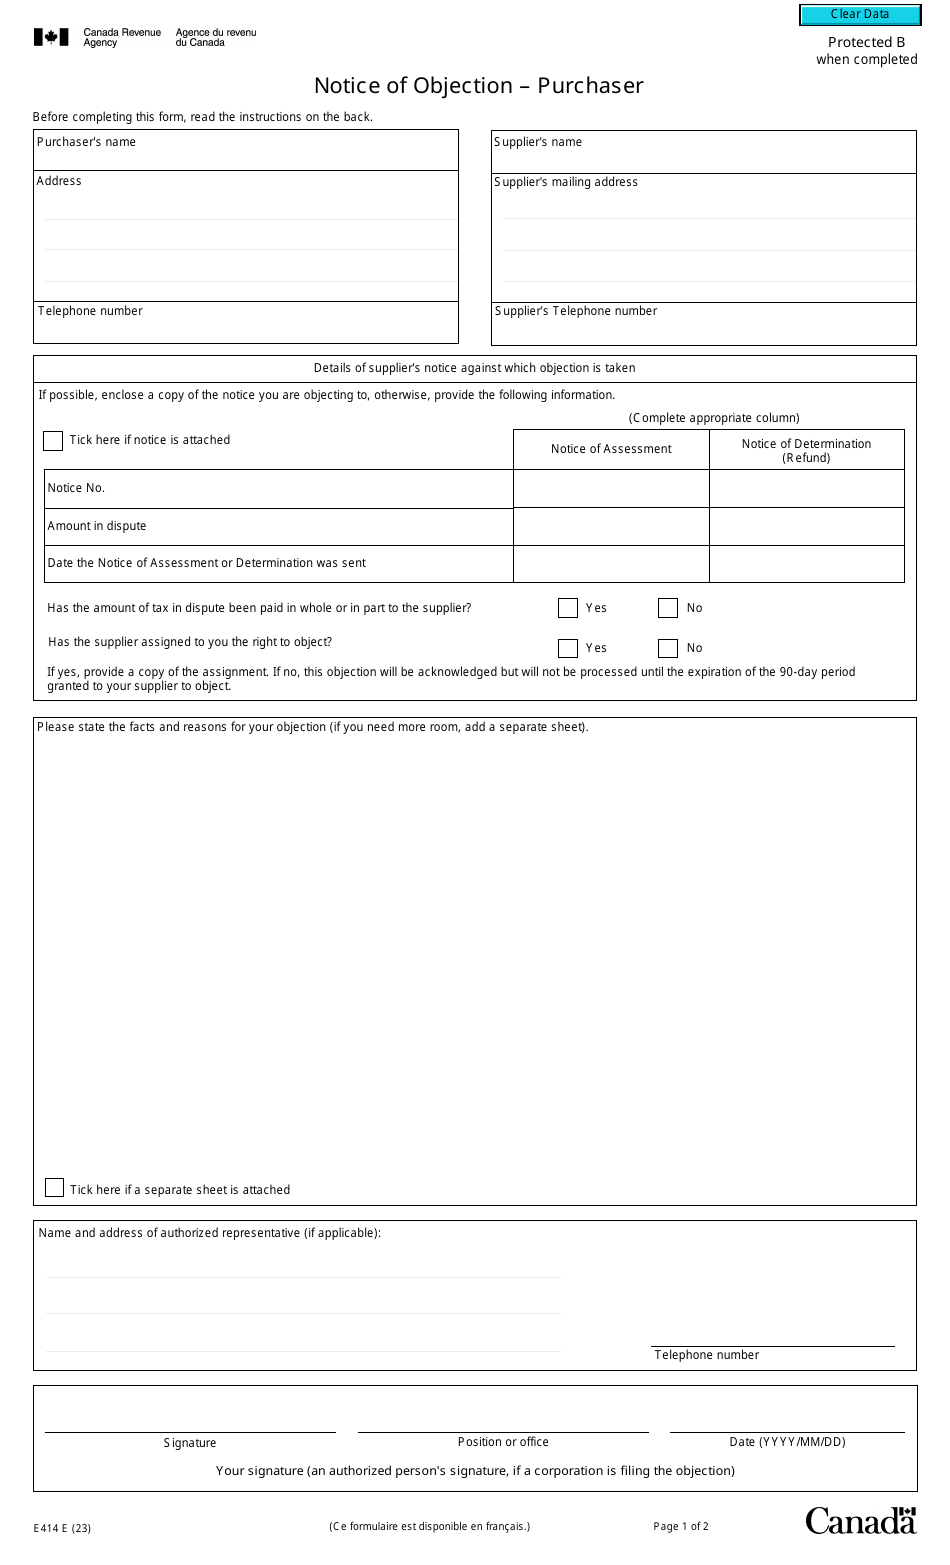 Form E414 Notice of Objection - Purchaser - Canada, Page 1